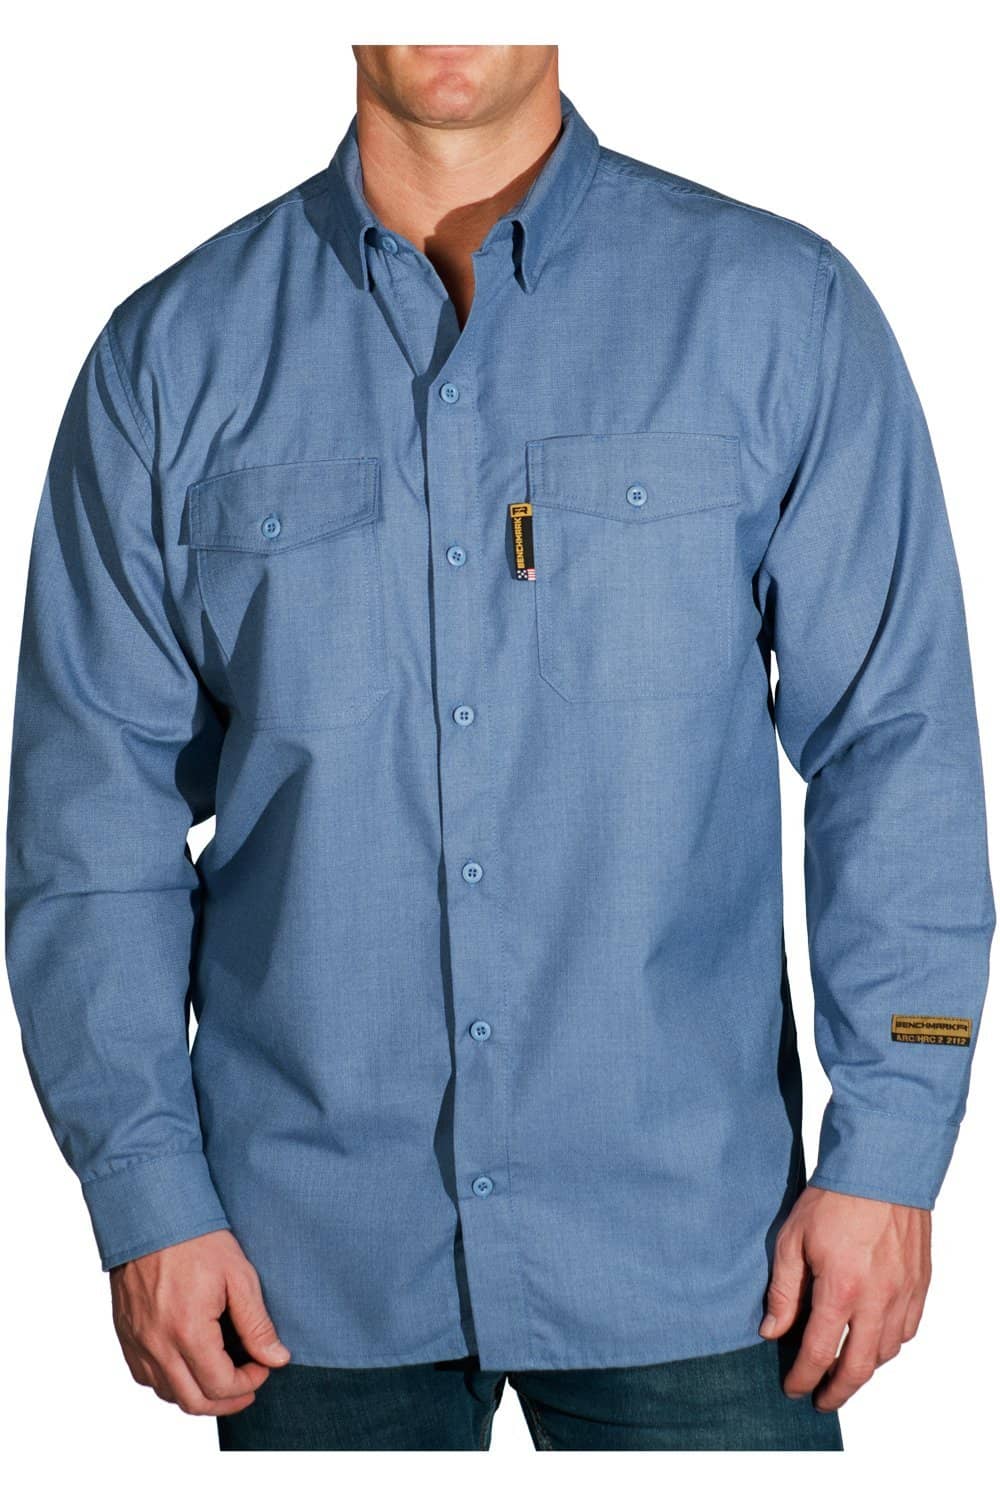 silver bullet flame resistant button up shirt light blue YSY Striping